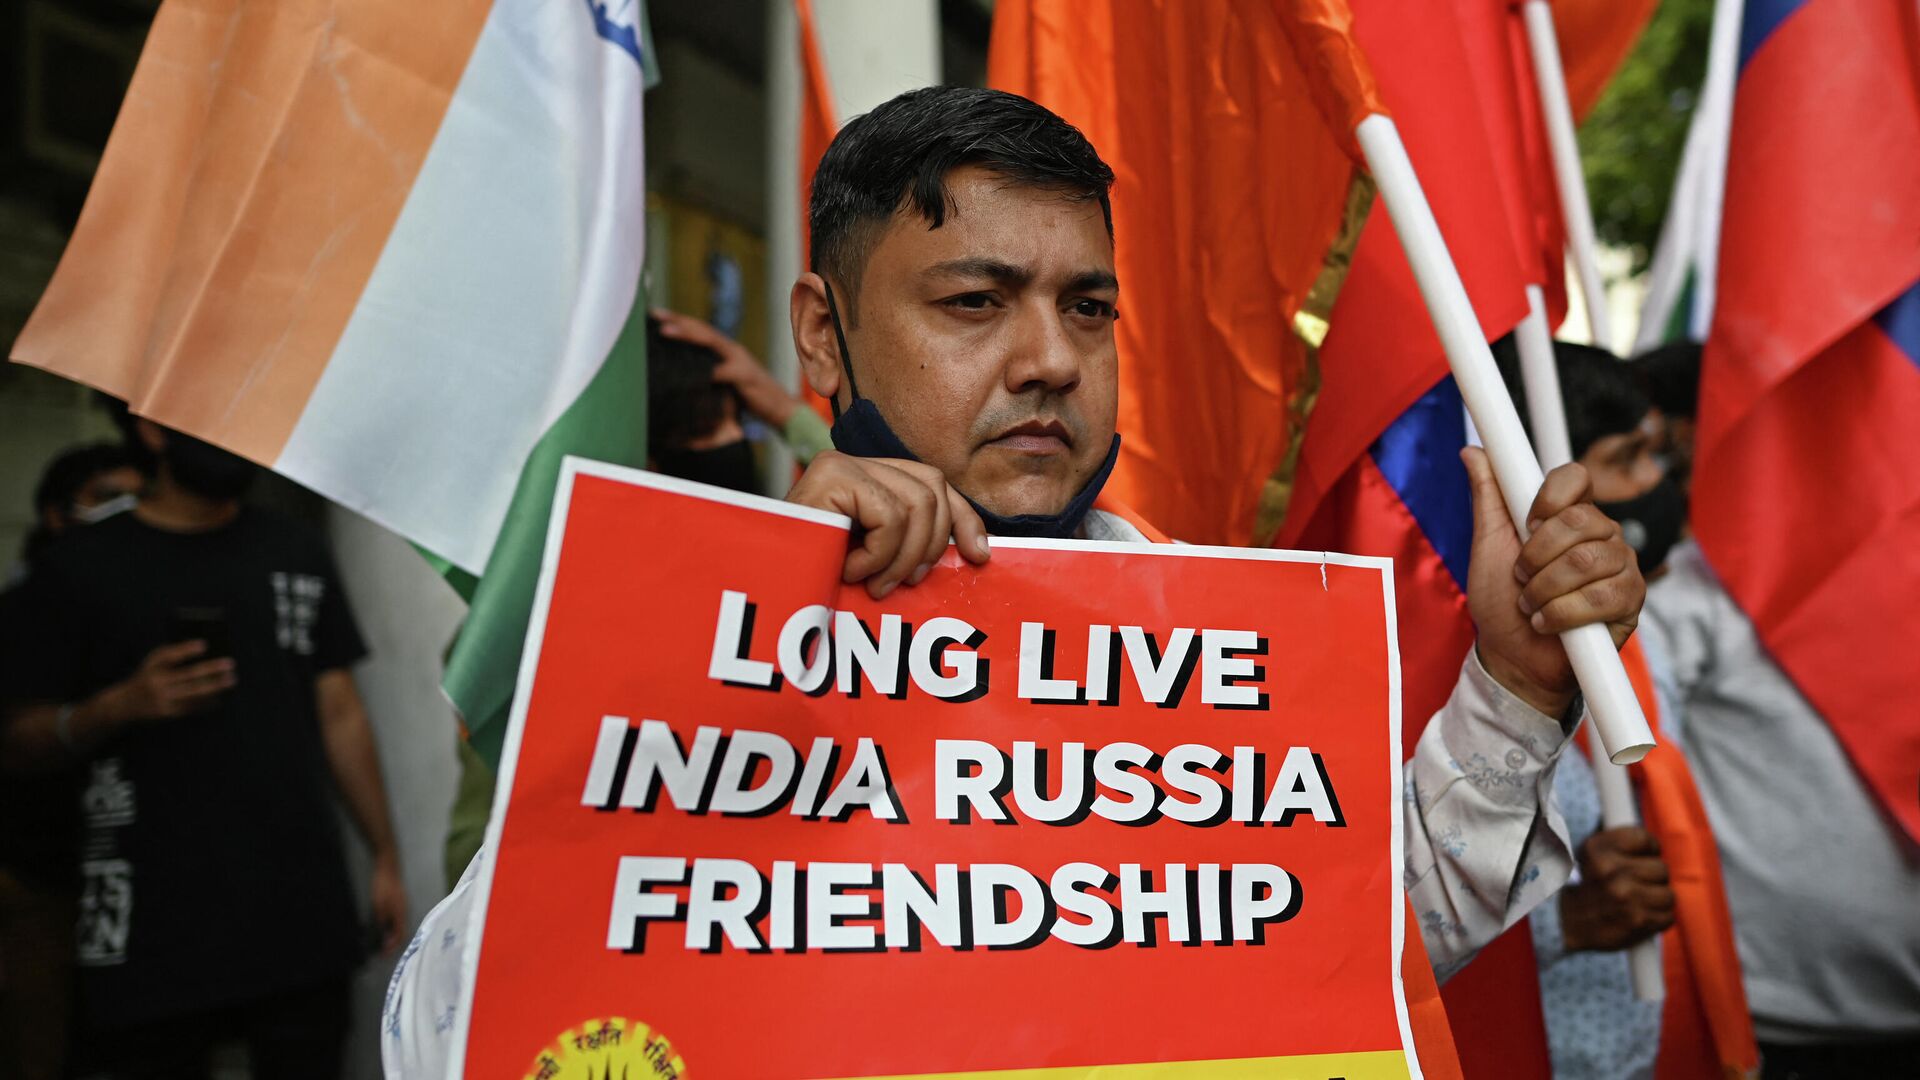 A supporter of Hindu Sena, a right-wing Hindu group, holds a placard as he takes part in a march in support of Russia during the ongoing Russia-West tensions on Ukraine, in New Delhi on March 6, 2022. - Sputnik International, 1920, 31.03.2022